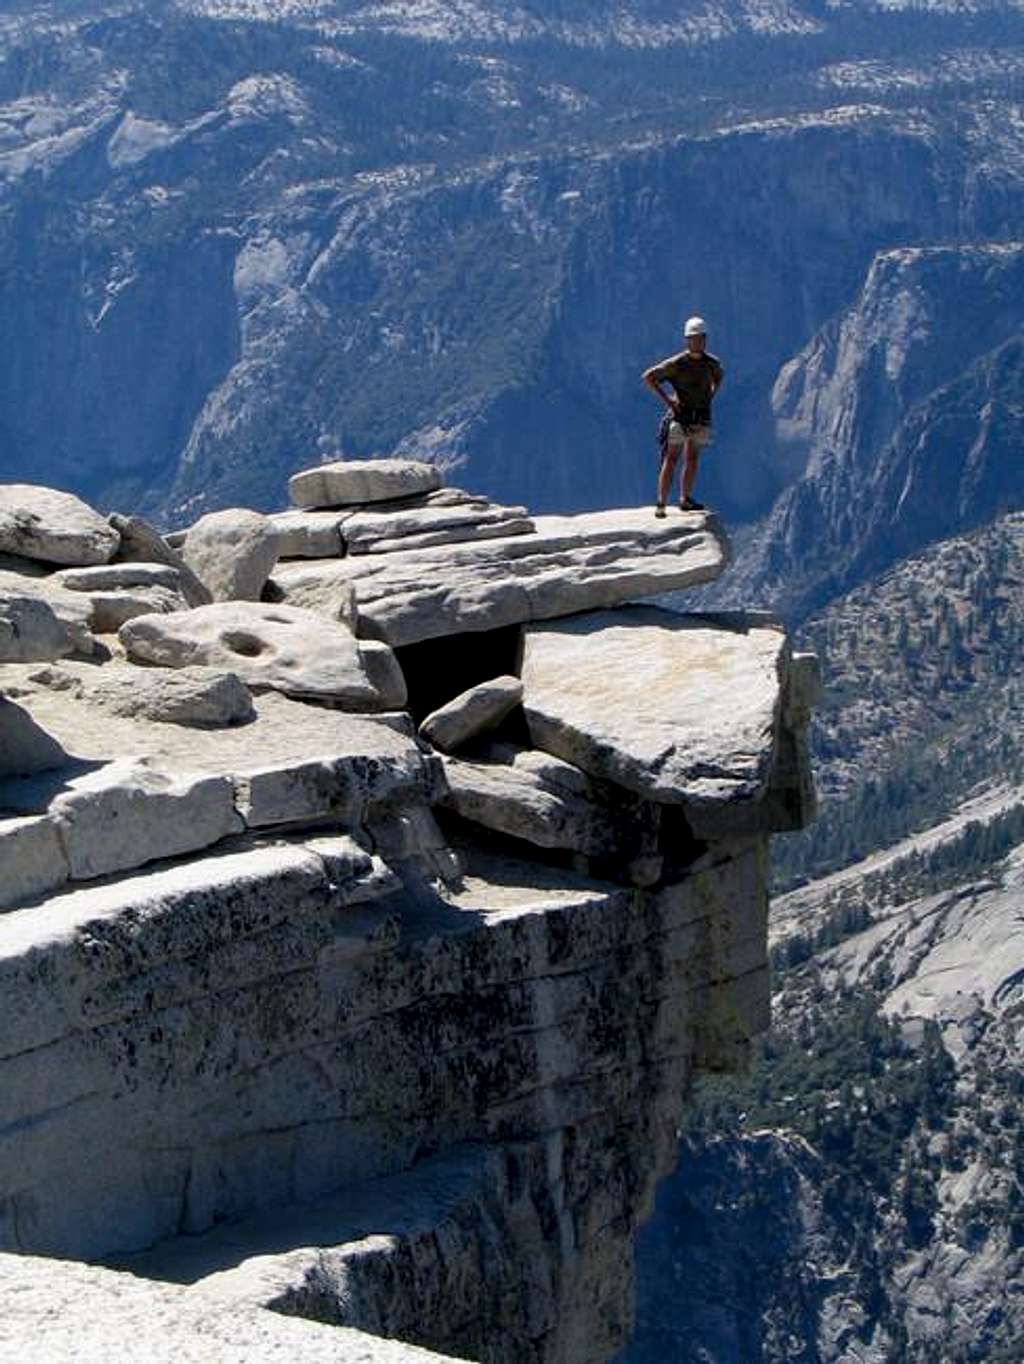 On the summit of Half Dome...